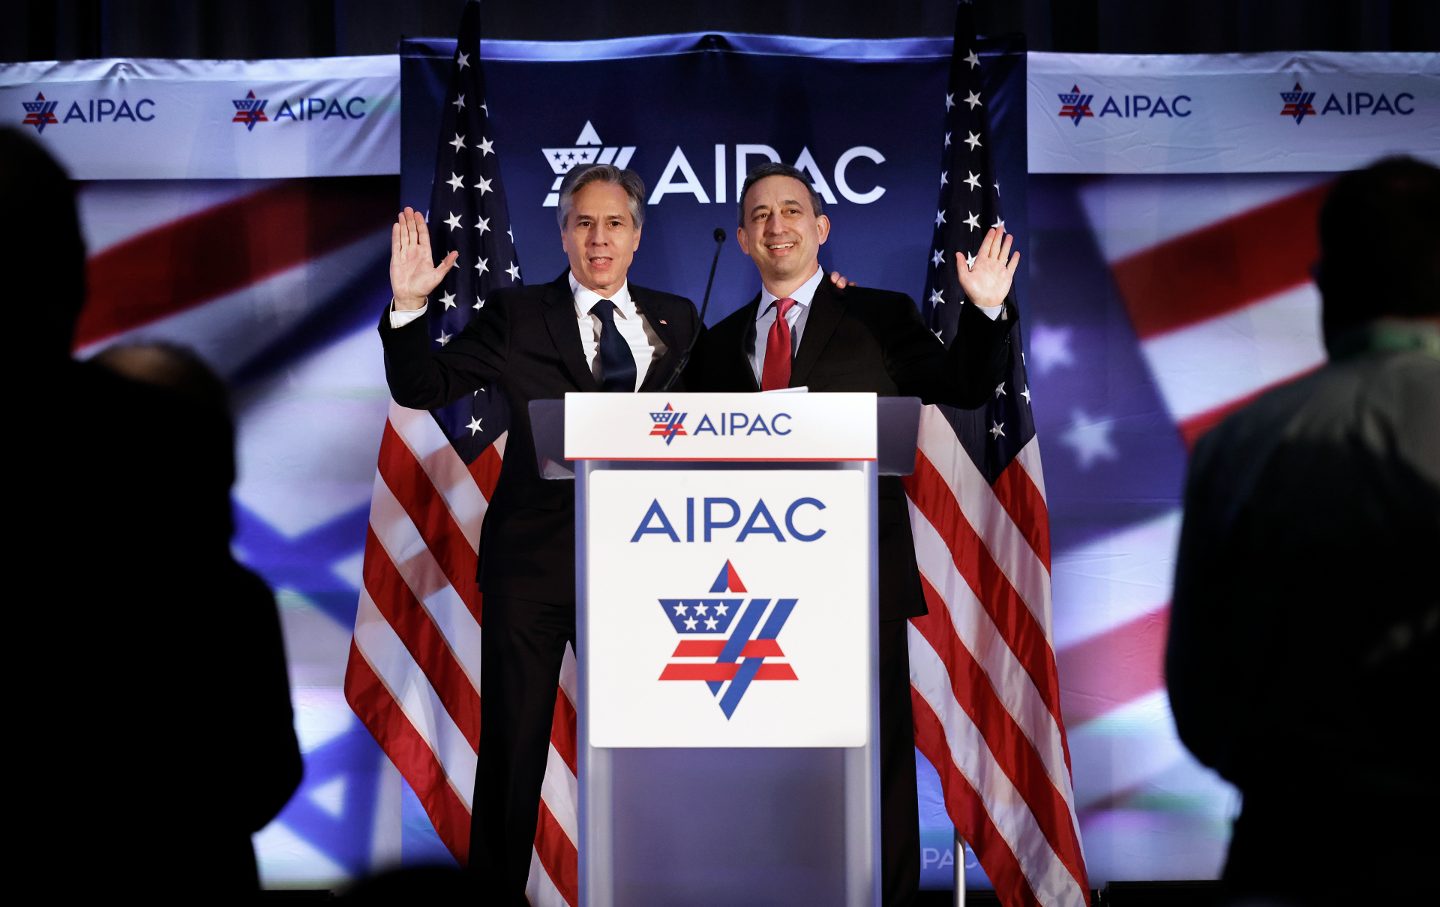 Secretary of State Antony Blinken (L) is welcomed to the stage by American Israel Public Affairs Committee (AIPAC) President Michael Tuchin during the committee's annual policy summit Grand Hyatt on June 05, 2023 in Washington, DC.